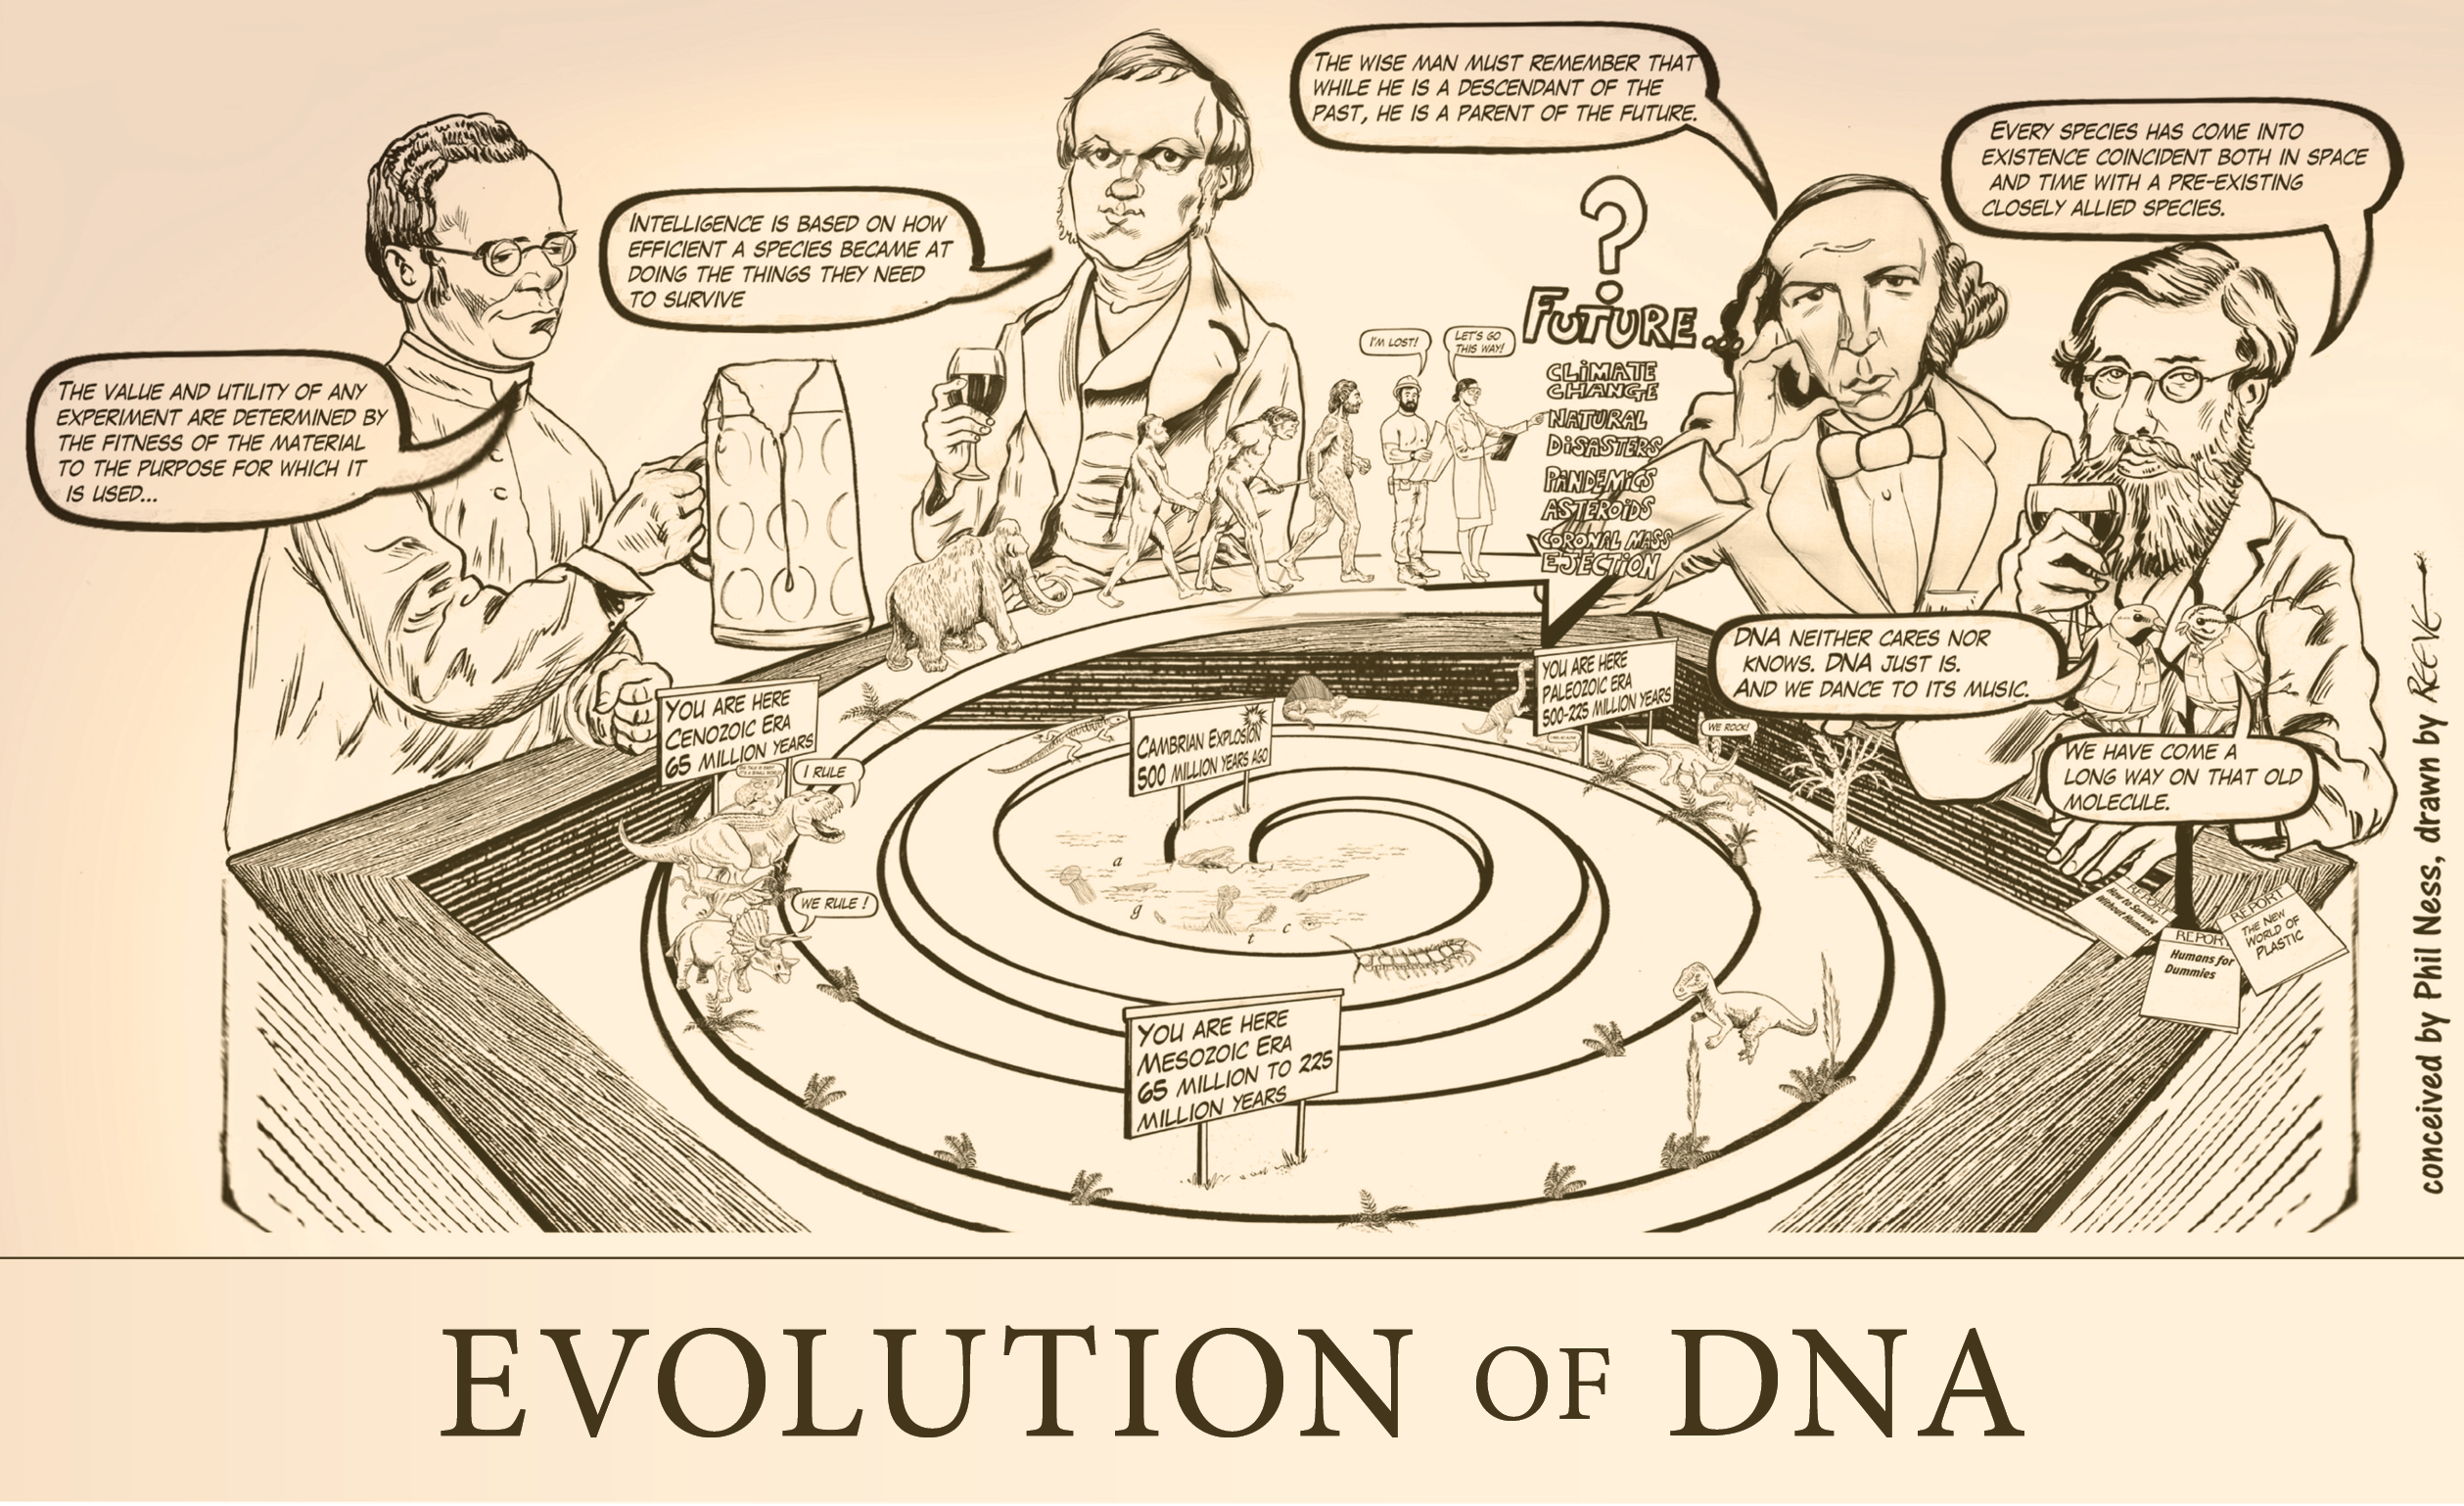 Cartoon: Evolution of DNA, 2022, conceived by Phil Ness, drawn by Reeve, 2022.